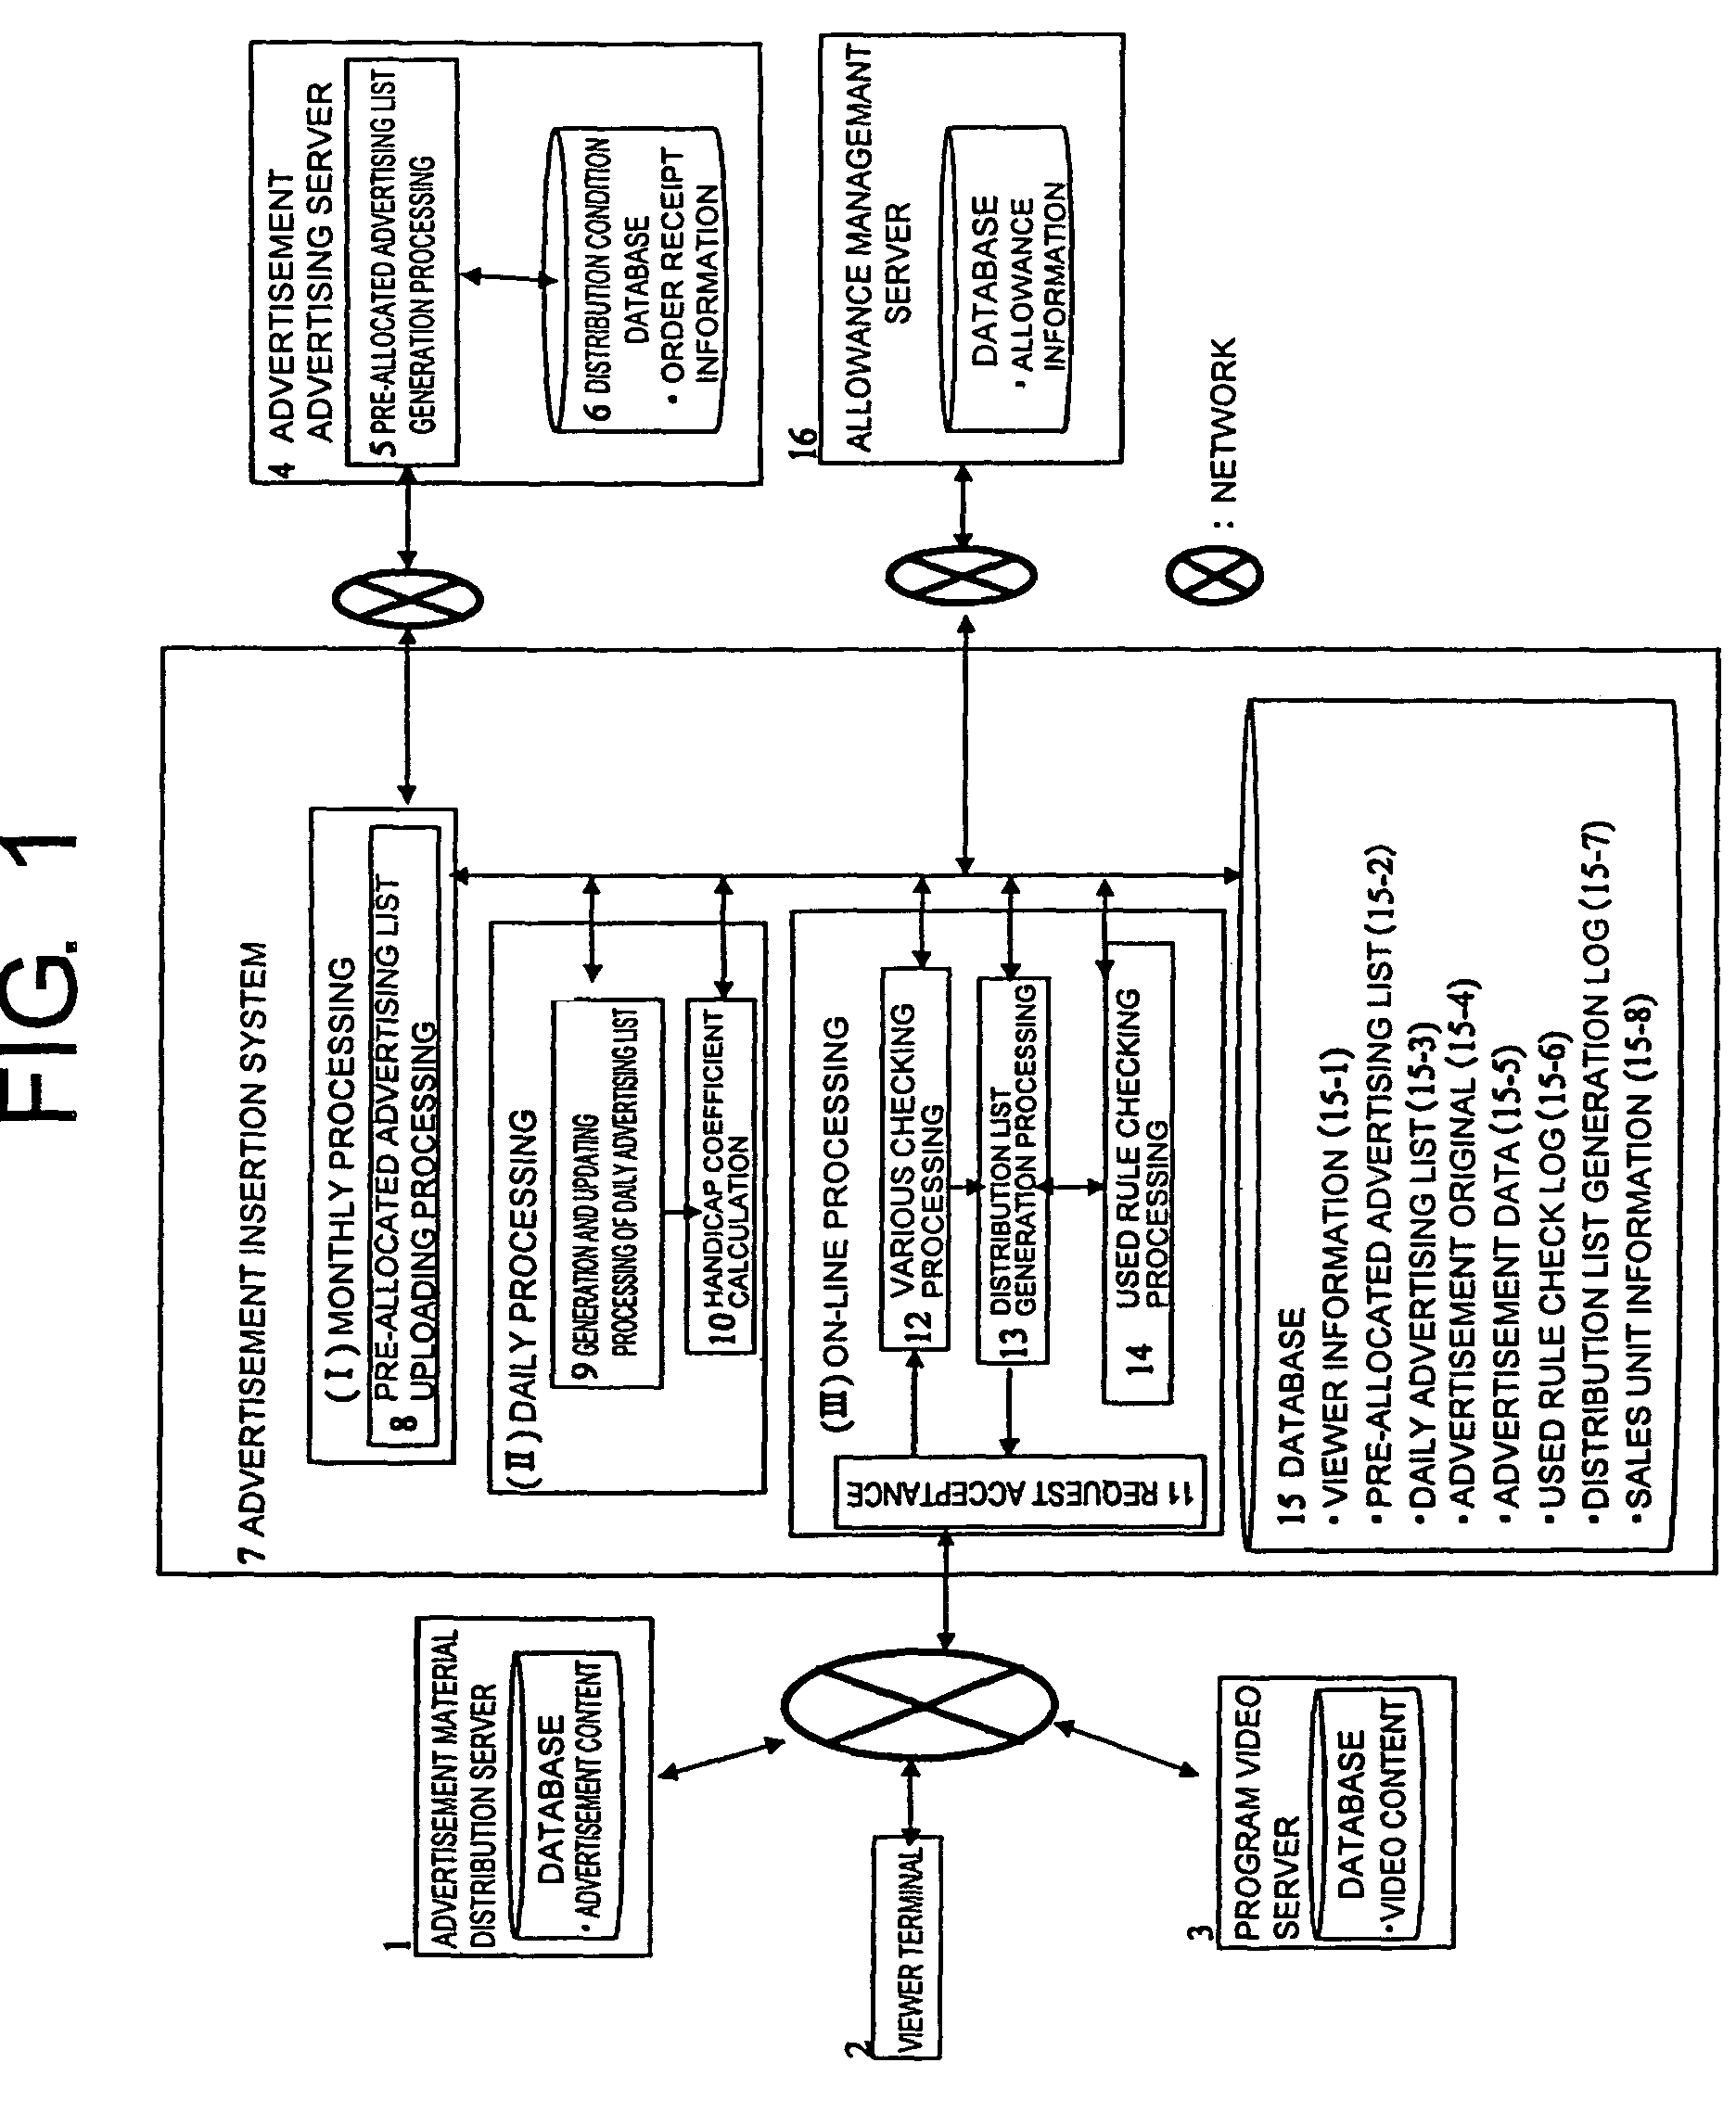 Information distribution systems and methods, programs realizing these methods, and information media concerning the programs